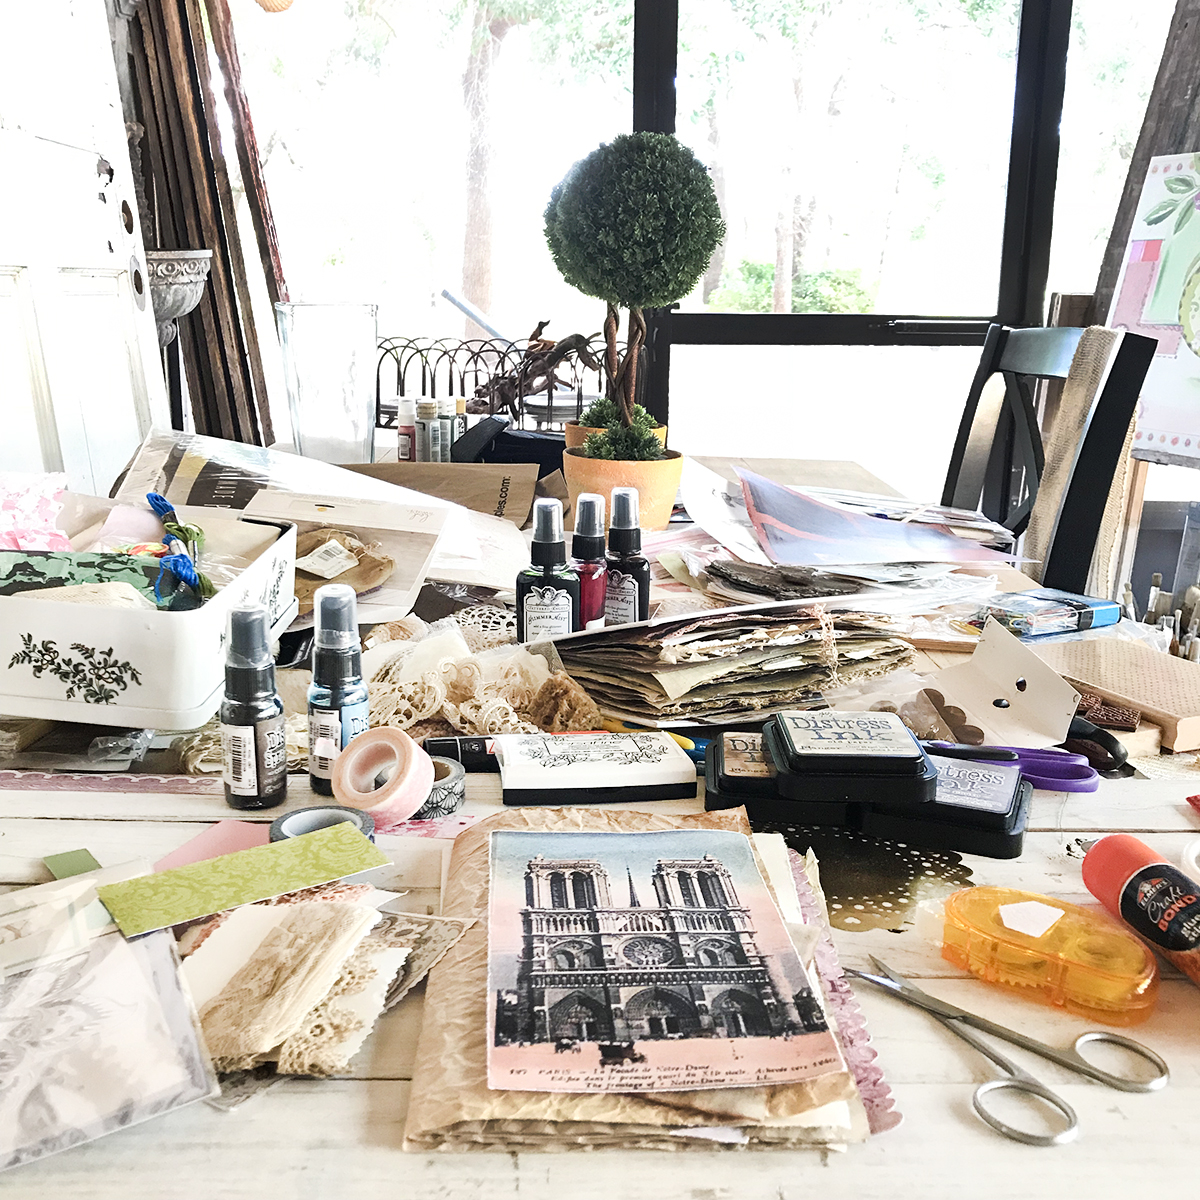 A table with papers and art supplies all over it